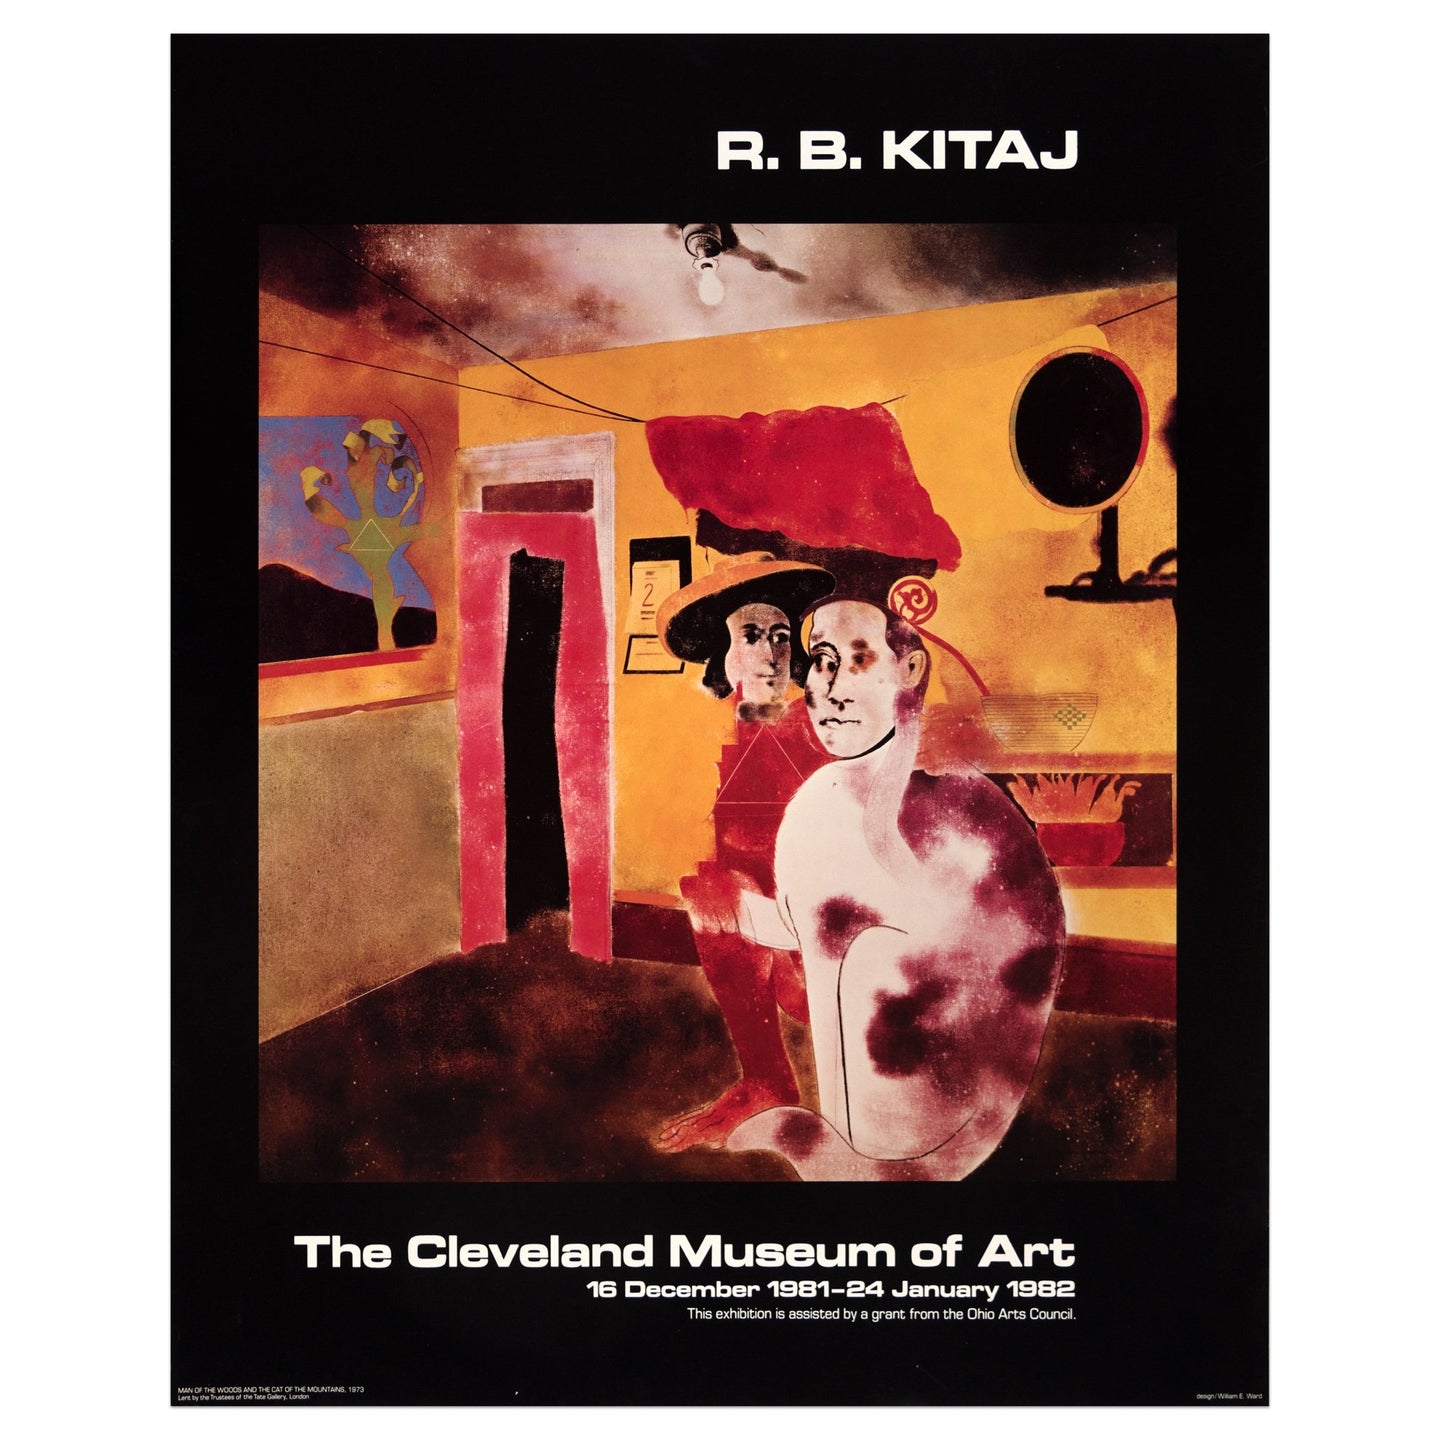 1982 The Cleveland Museum of Art poster for R.B. Kitaj featuring two human/animal figures in a predominantly yellow and orange room at night